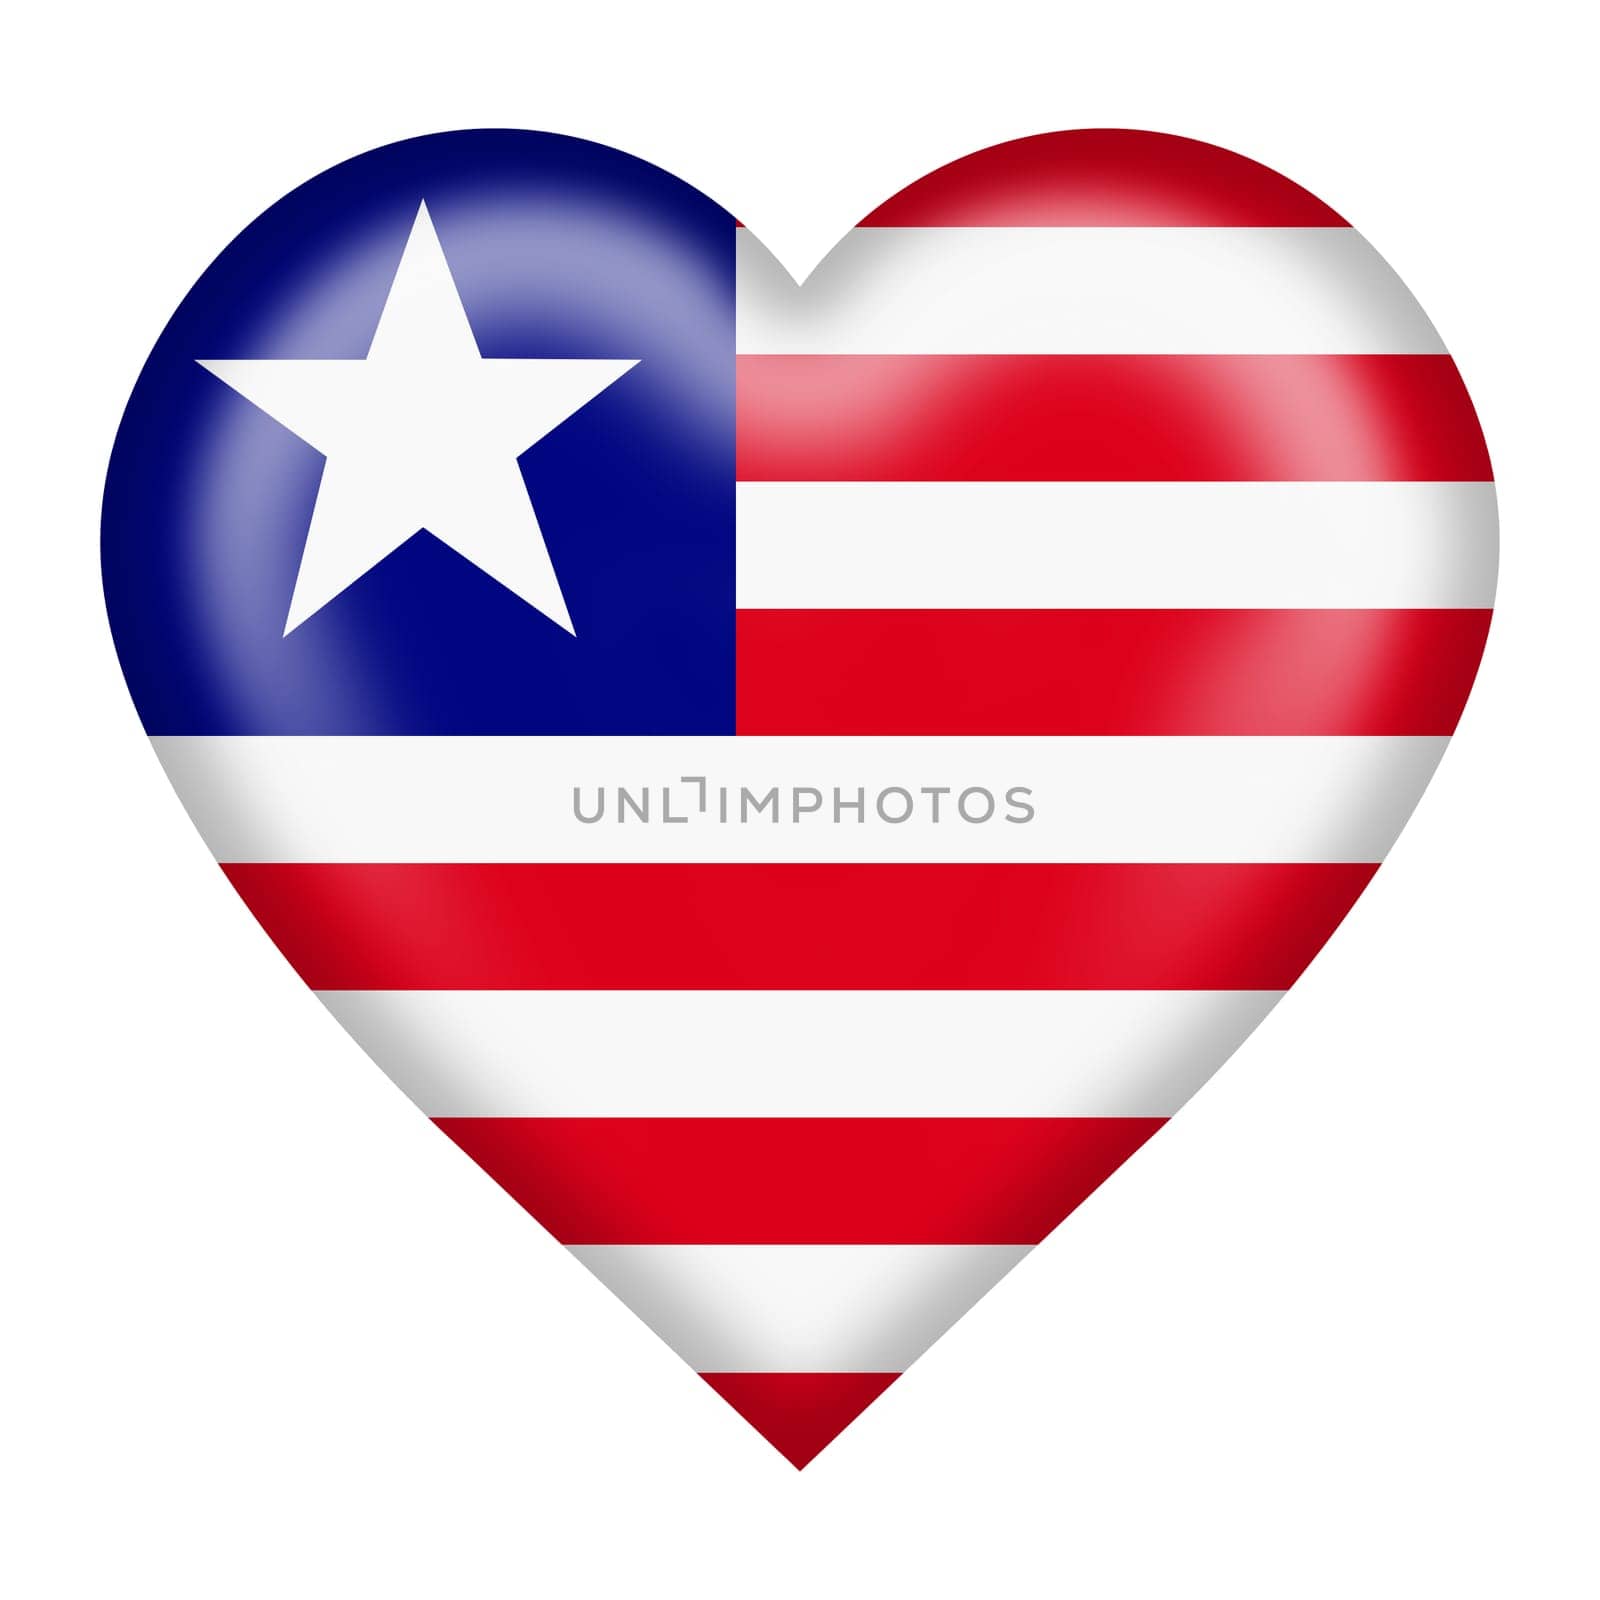 A Liberia flag heart button by VivacityImages